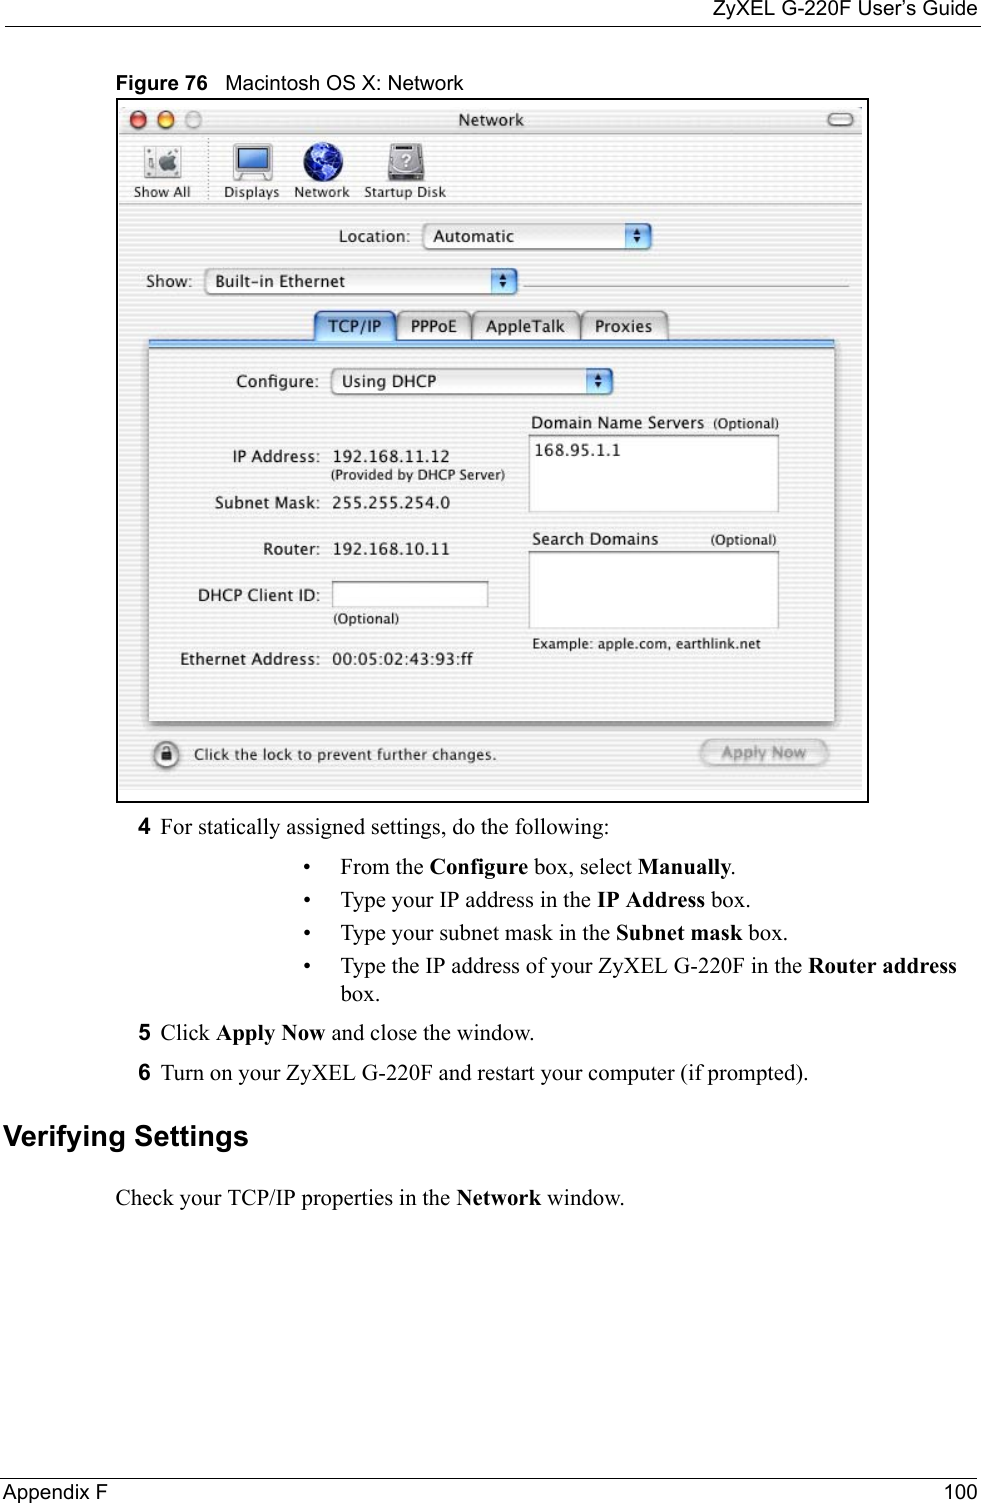 ZyXEL G-220F User’s GuideAppendix F 100Figure 76   Macintosh OS X: Network4For statically assigned settings, do the following:•From the Configure box, select Manually.• Type your IP address in the IP Address box.• Type your subnet mask in the Subnet mask box.• Type the IP address of your ZyXEL G-220F in the Router address box.5Click Apply Now and close the window.6Turn on your ZyXEL G-220F and restart your computer (if prompted).Verifying SettingsCheck your TCP/IP properties in the Network window.